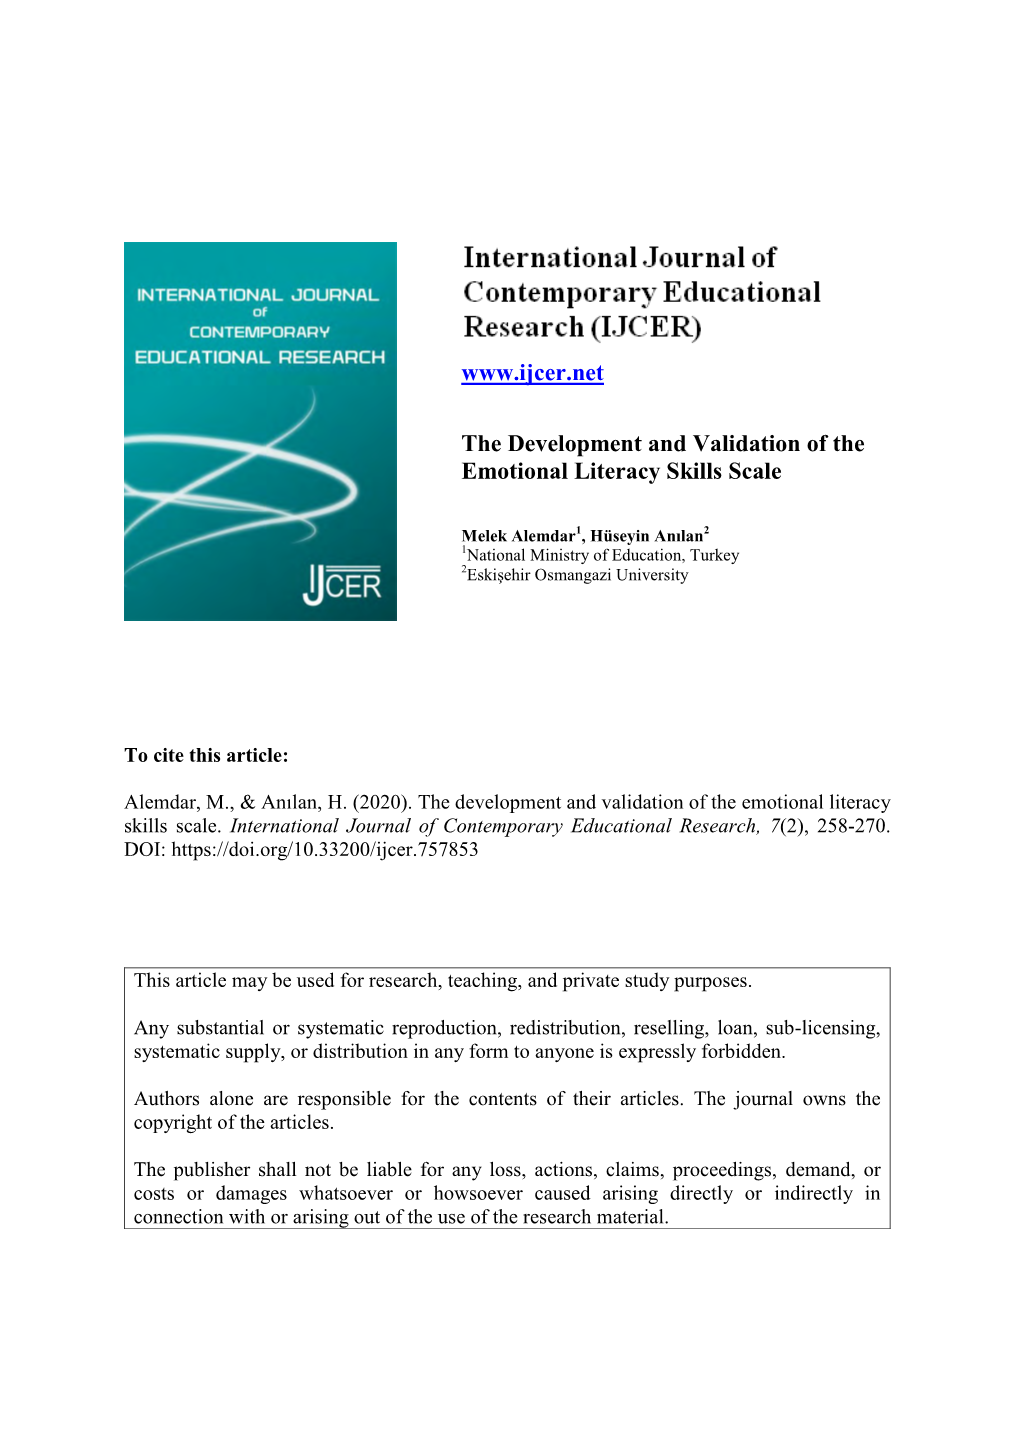 The Development and Validation of the Emotional Literacy Skills Scale. International Journal of Contemporary Educational Research, 7(2), 258-270